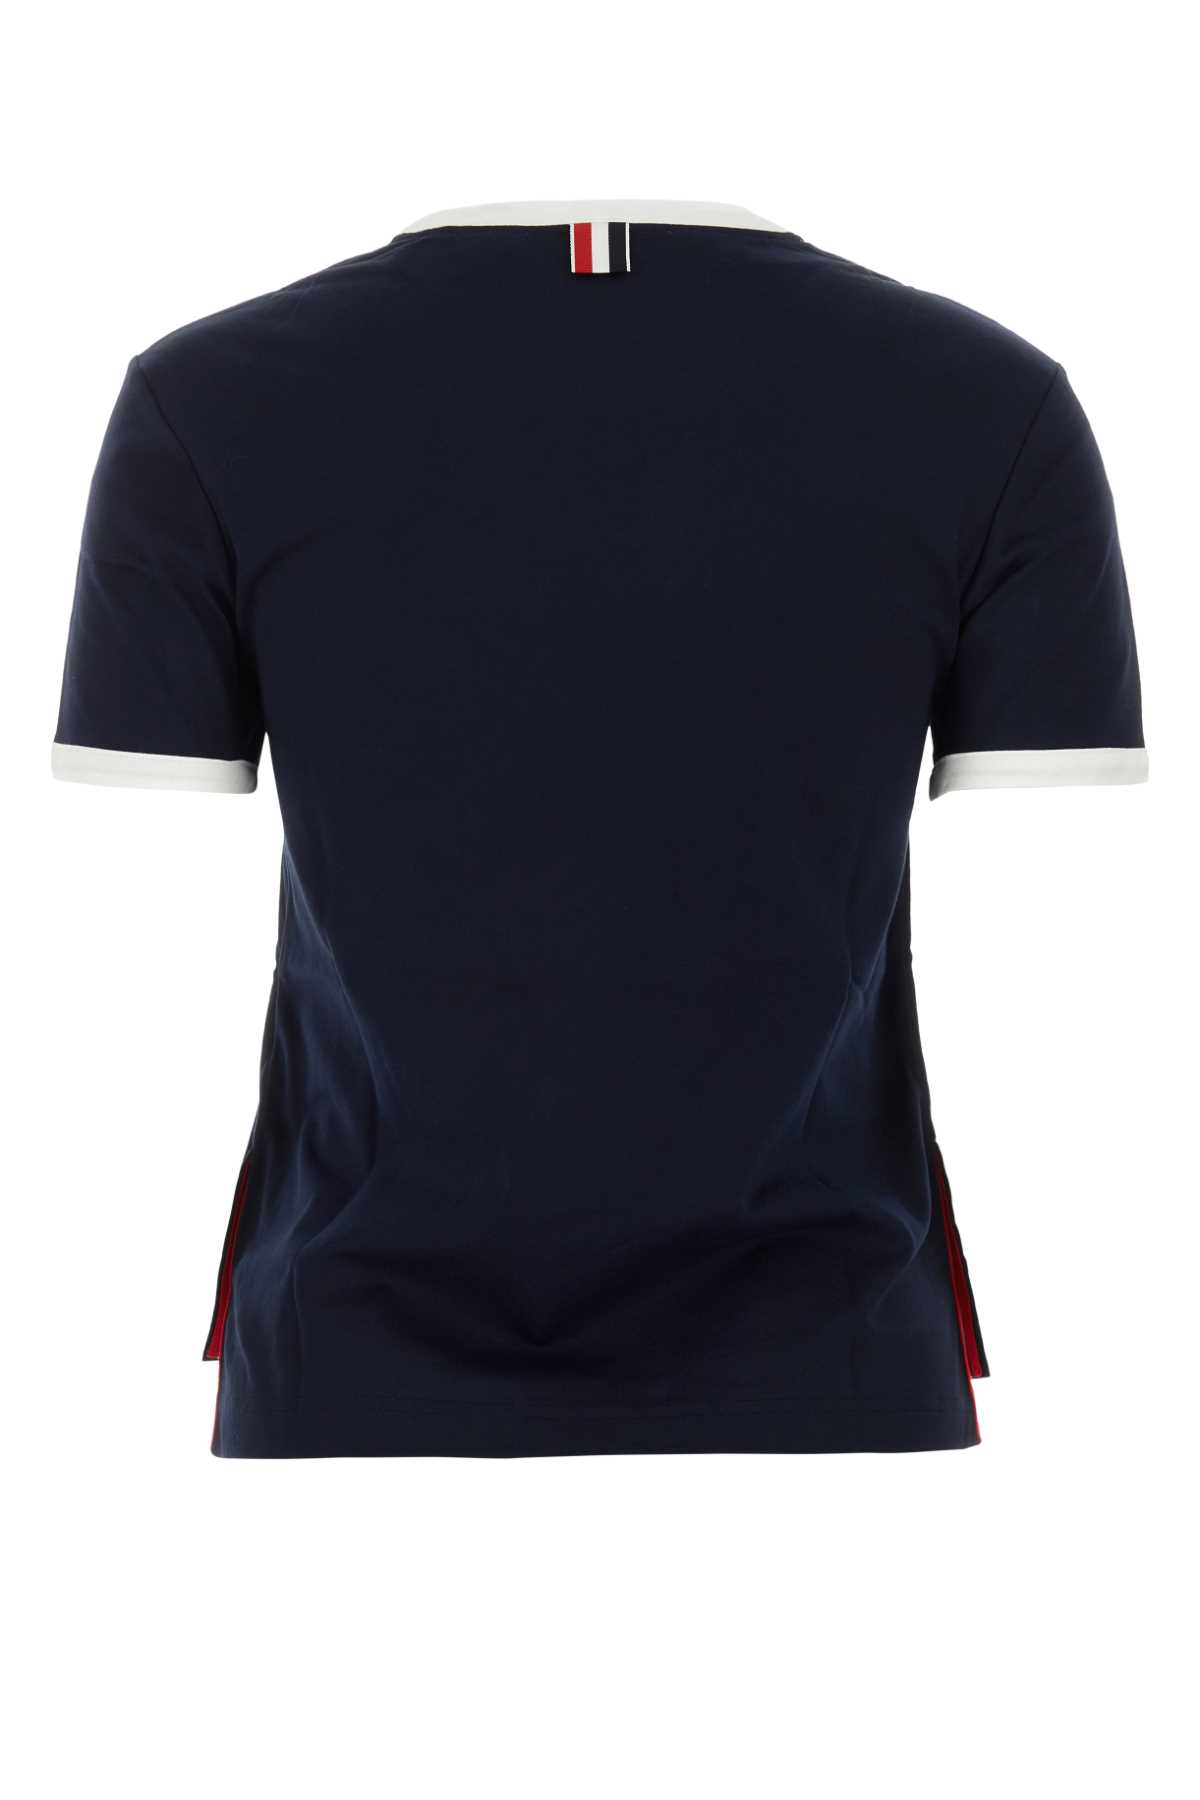 Thom Browne Blue Cotton T-shirt In 415